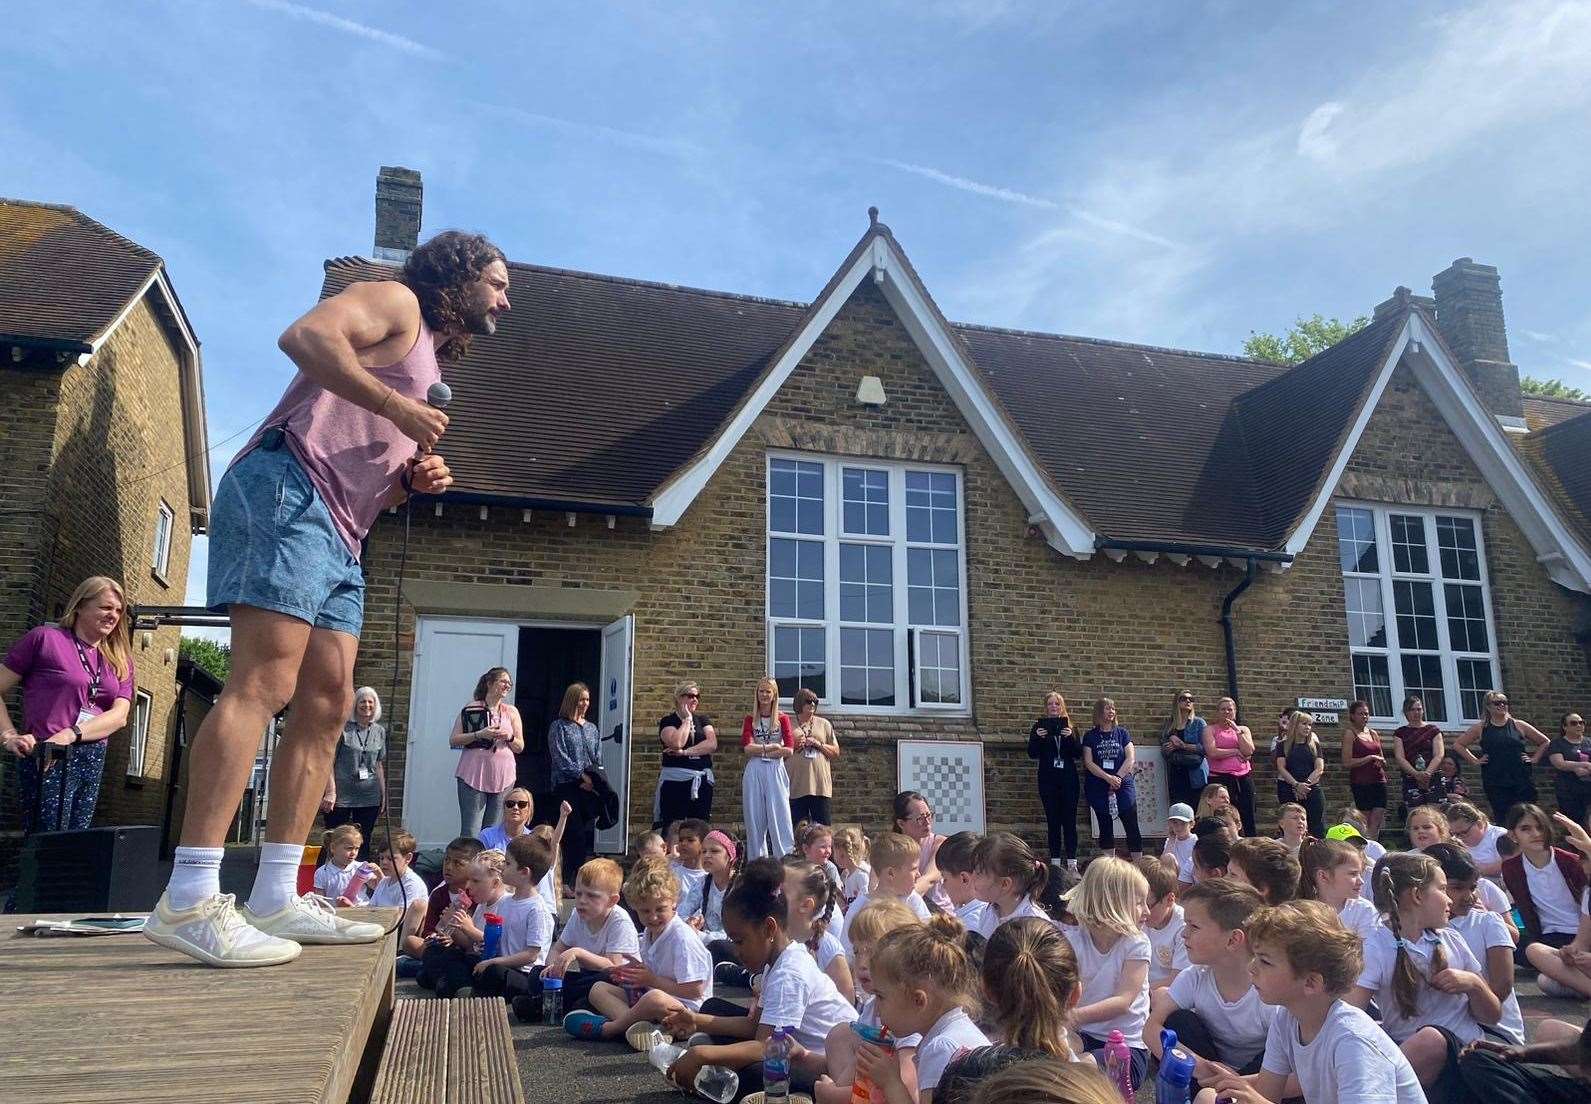 Joe Wicks delighted students at Charlton Church of England Primary School in Dover this morning